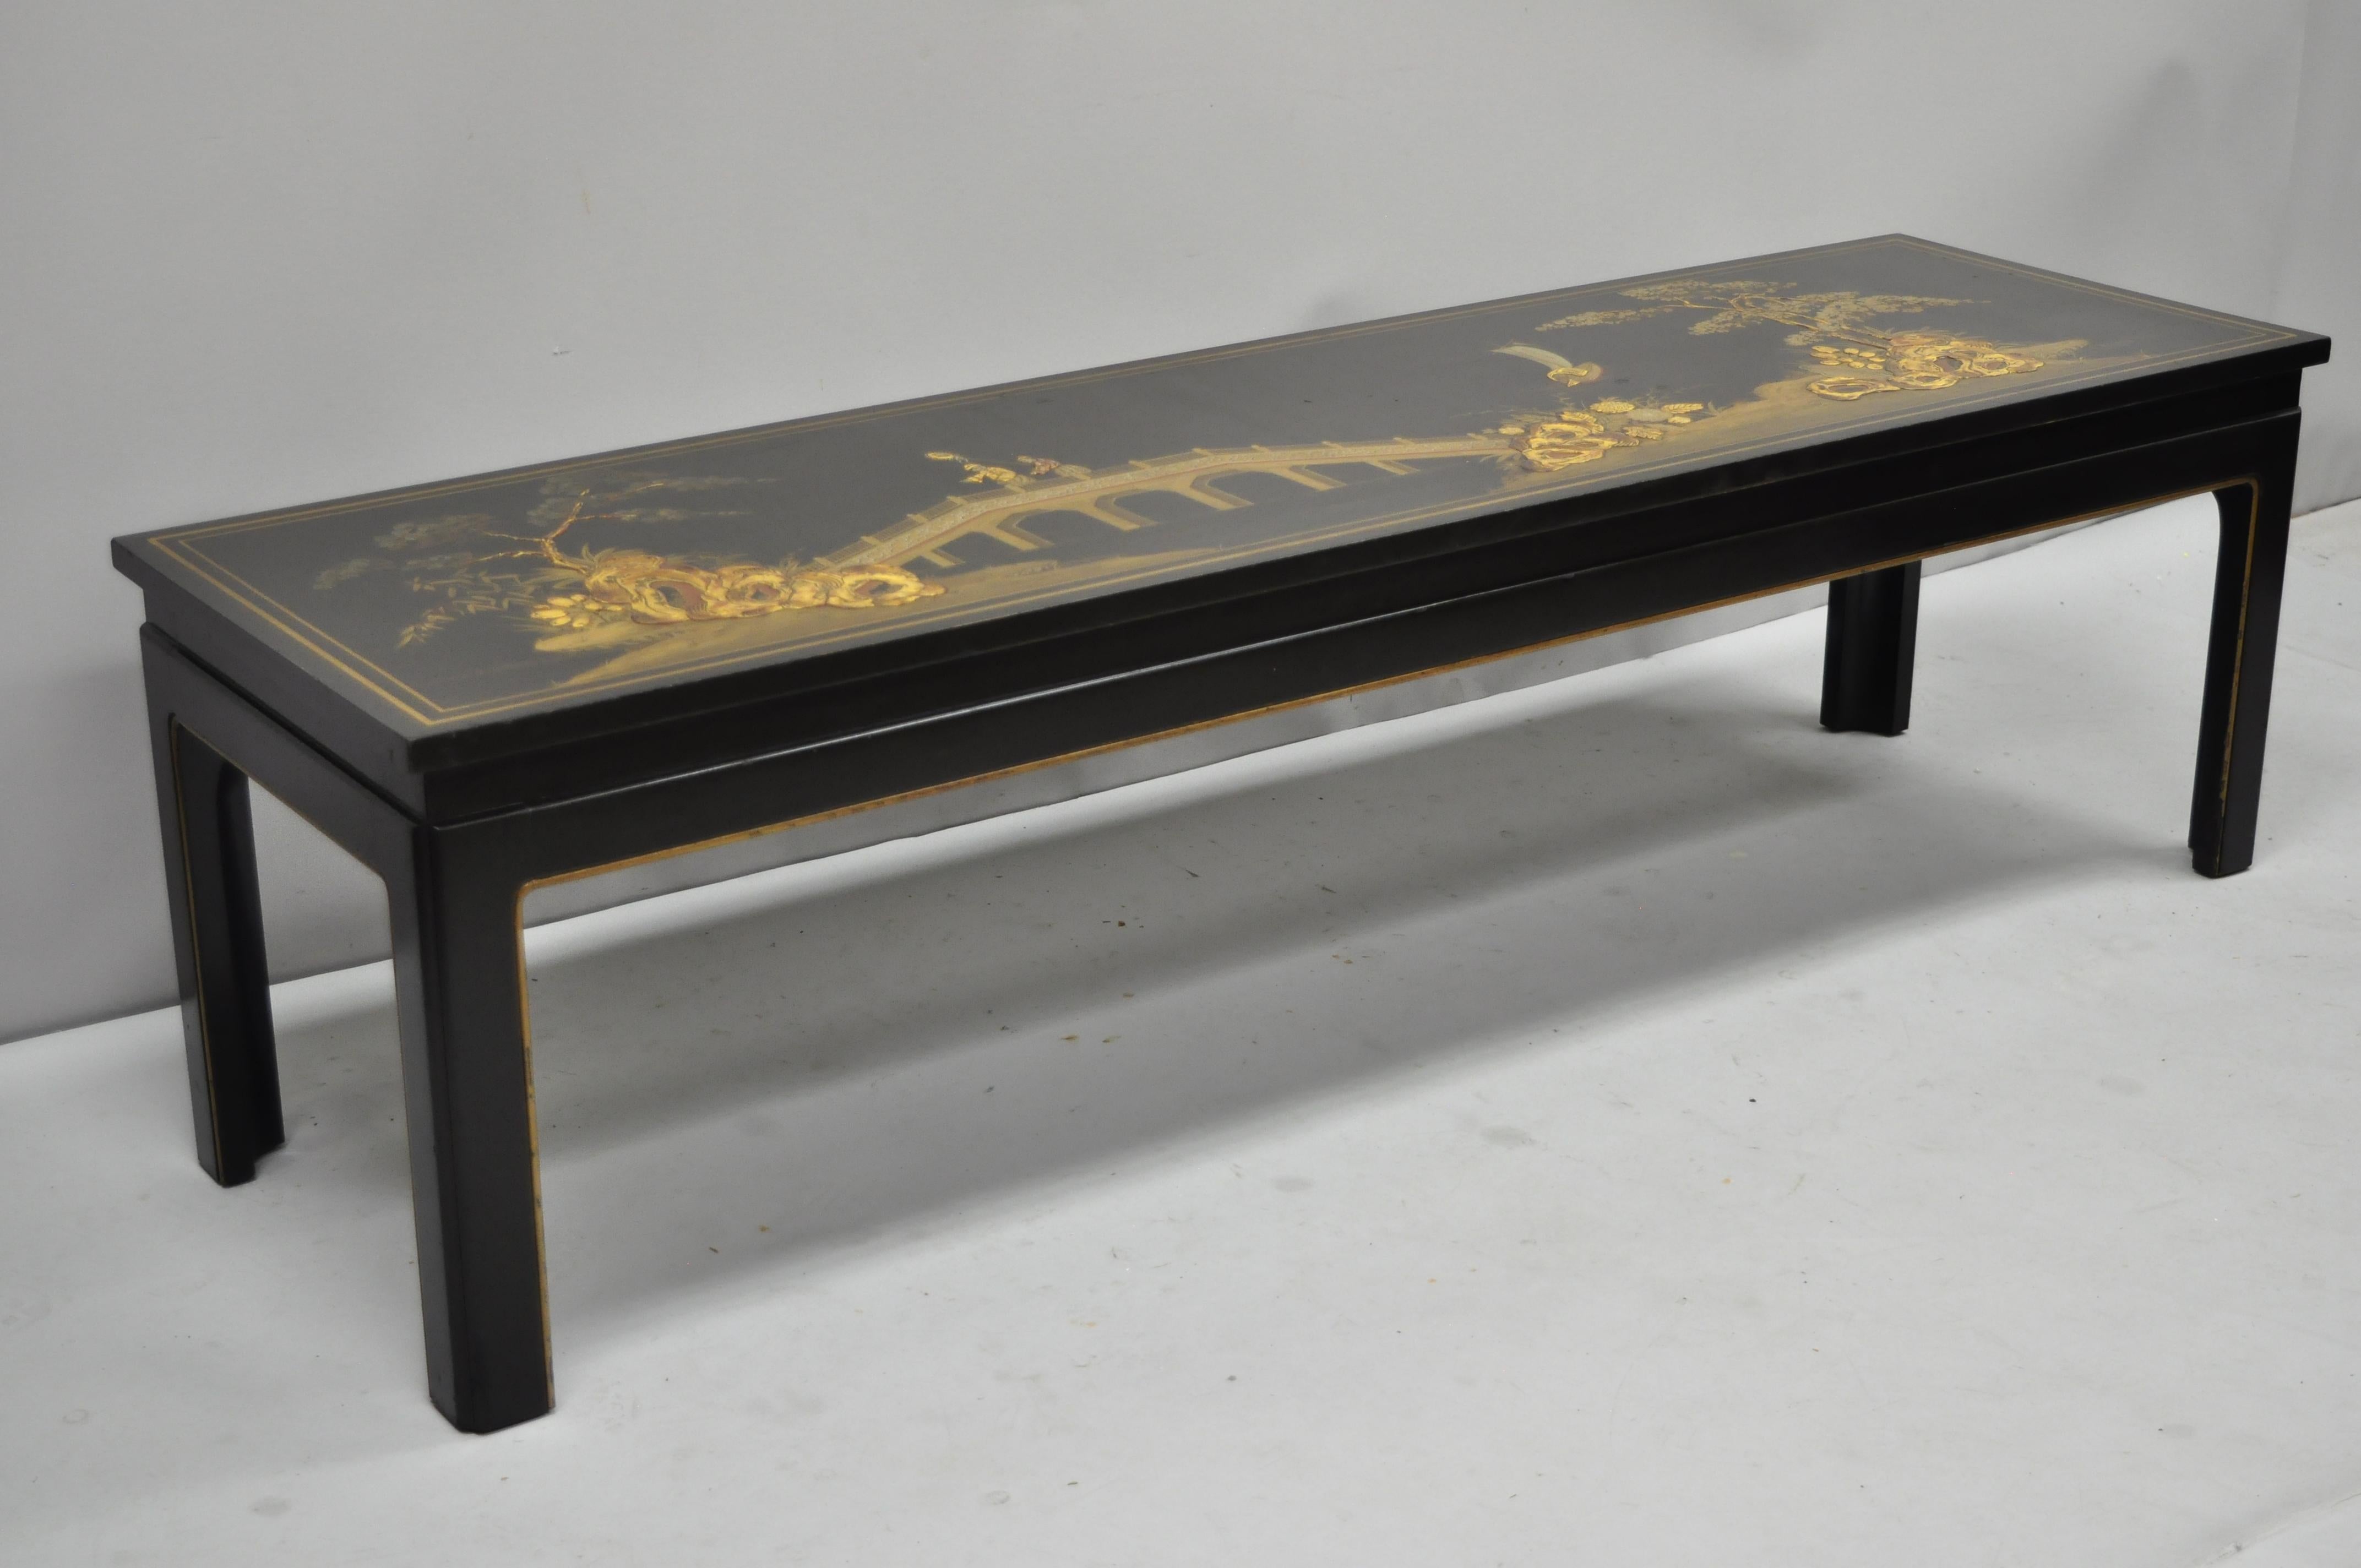 Antique Beacon Hill Collection George III Chinoiserie black lacquer painted coffee table. Item features black lacquer finish, gold hand painted Chinese figural scenes, solid wood frame, original label, quality American craftsmanship, great style and